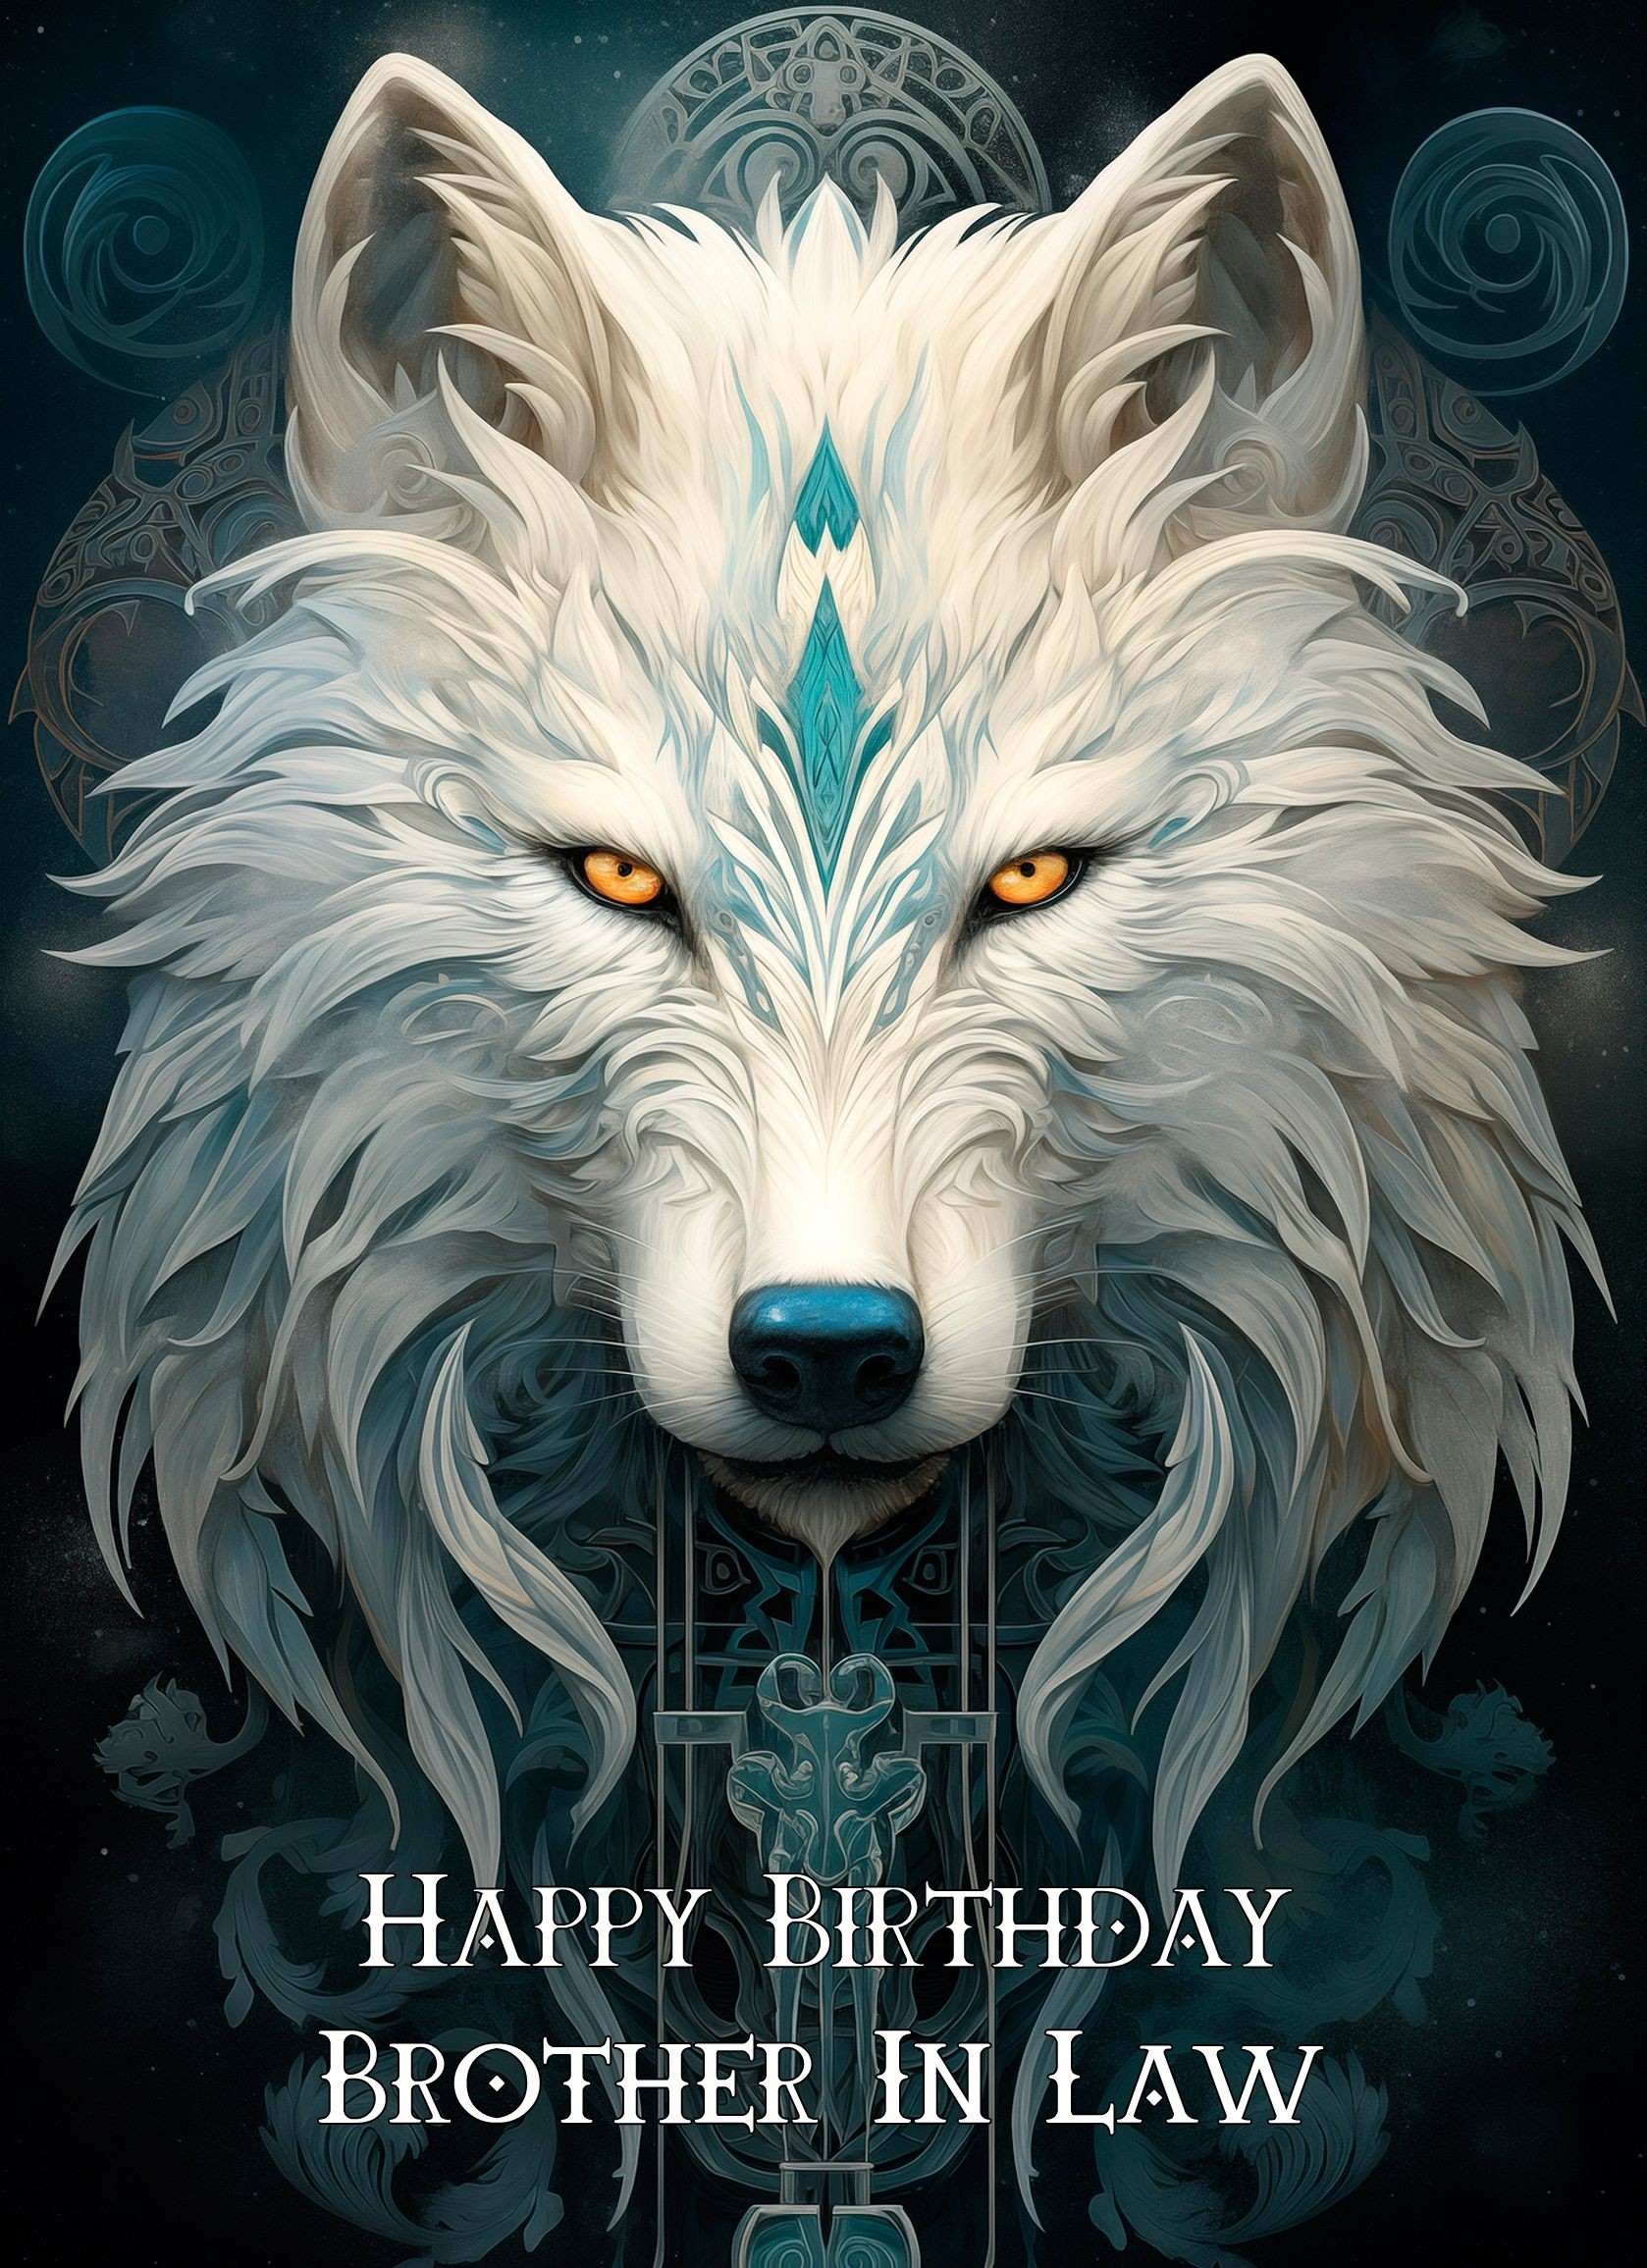 Tribal Wolf Art Birthday Card For Brother in Law (Design 1)